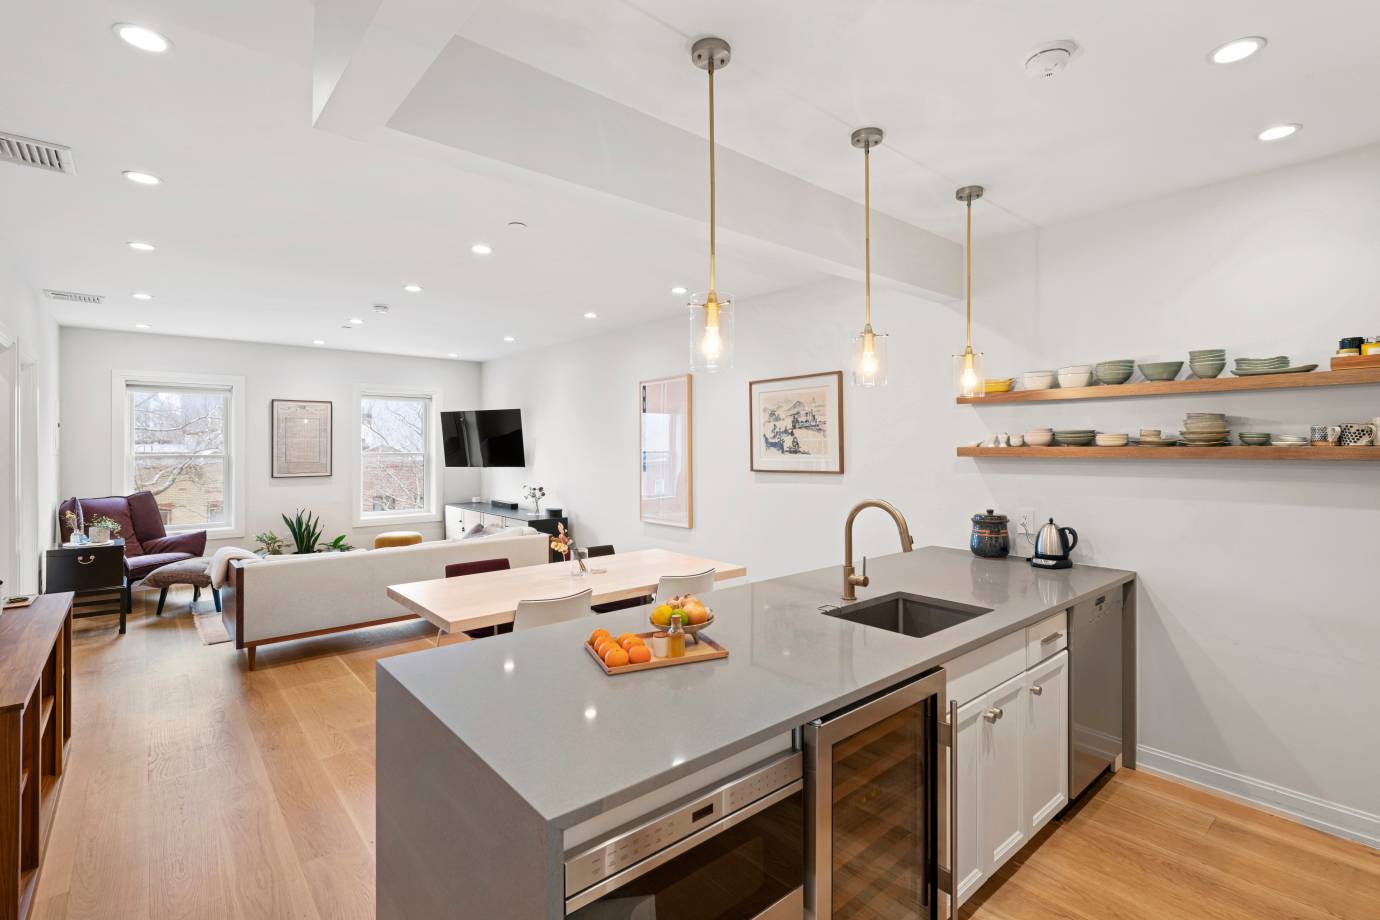 In central Carroll Gardens Cobble Hill, situated perfectly between Court St.